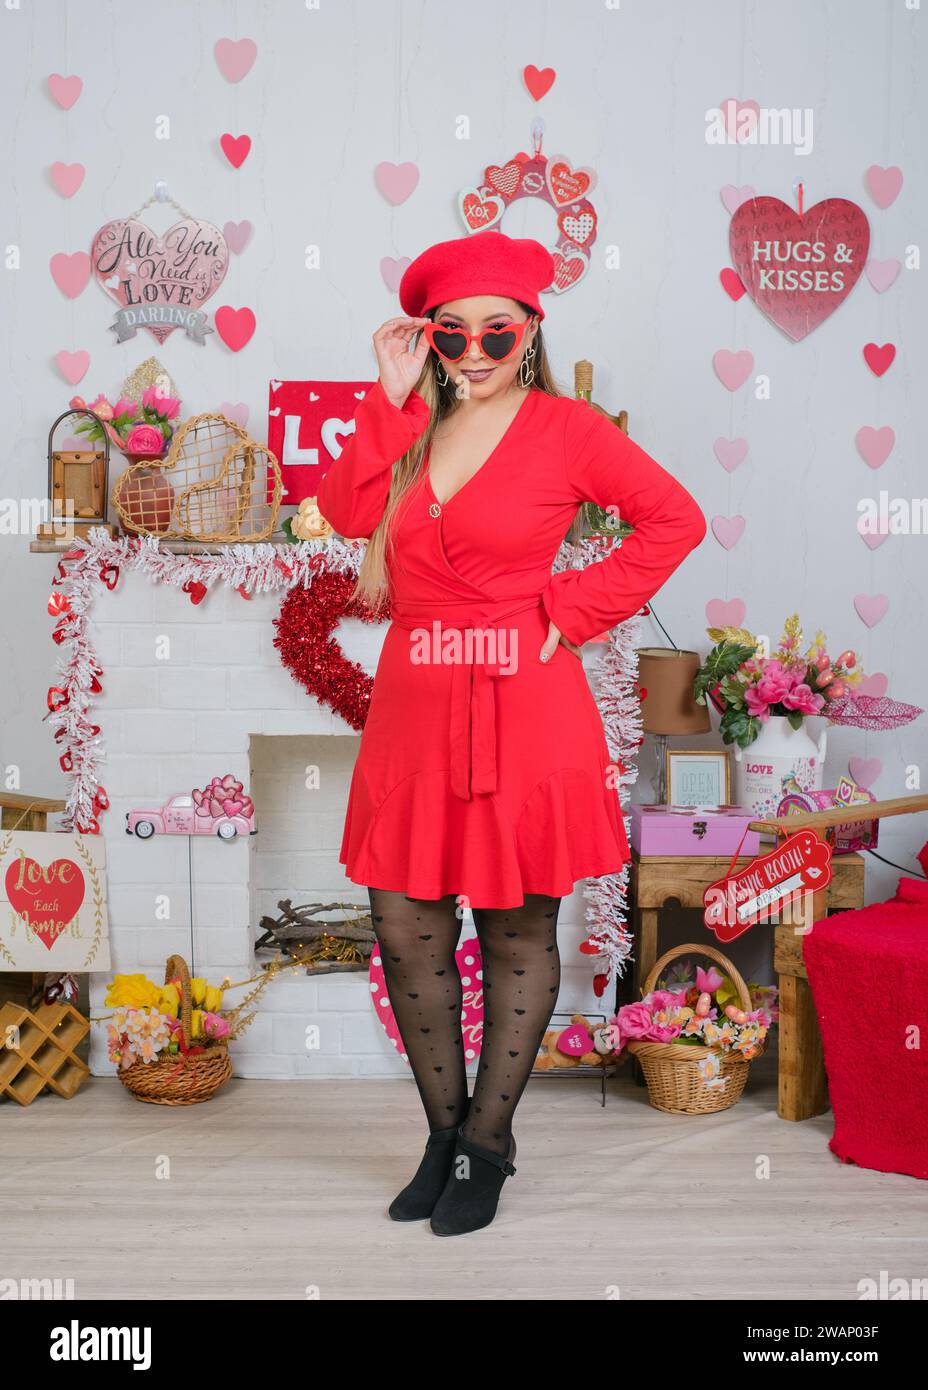 Woman wearing red dress and beret with heart shaped glasses. Decorated background for Valentine's Day. Stock Photo